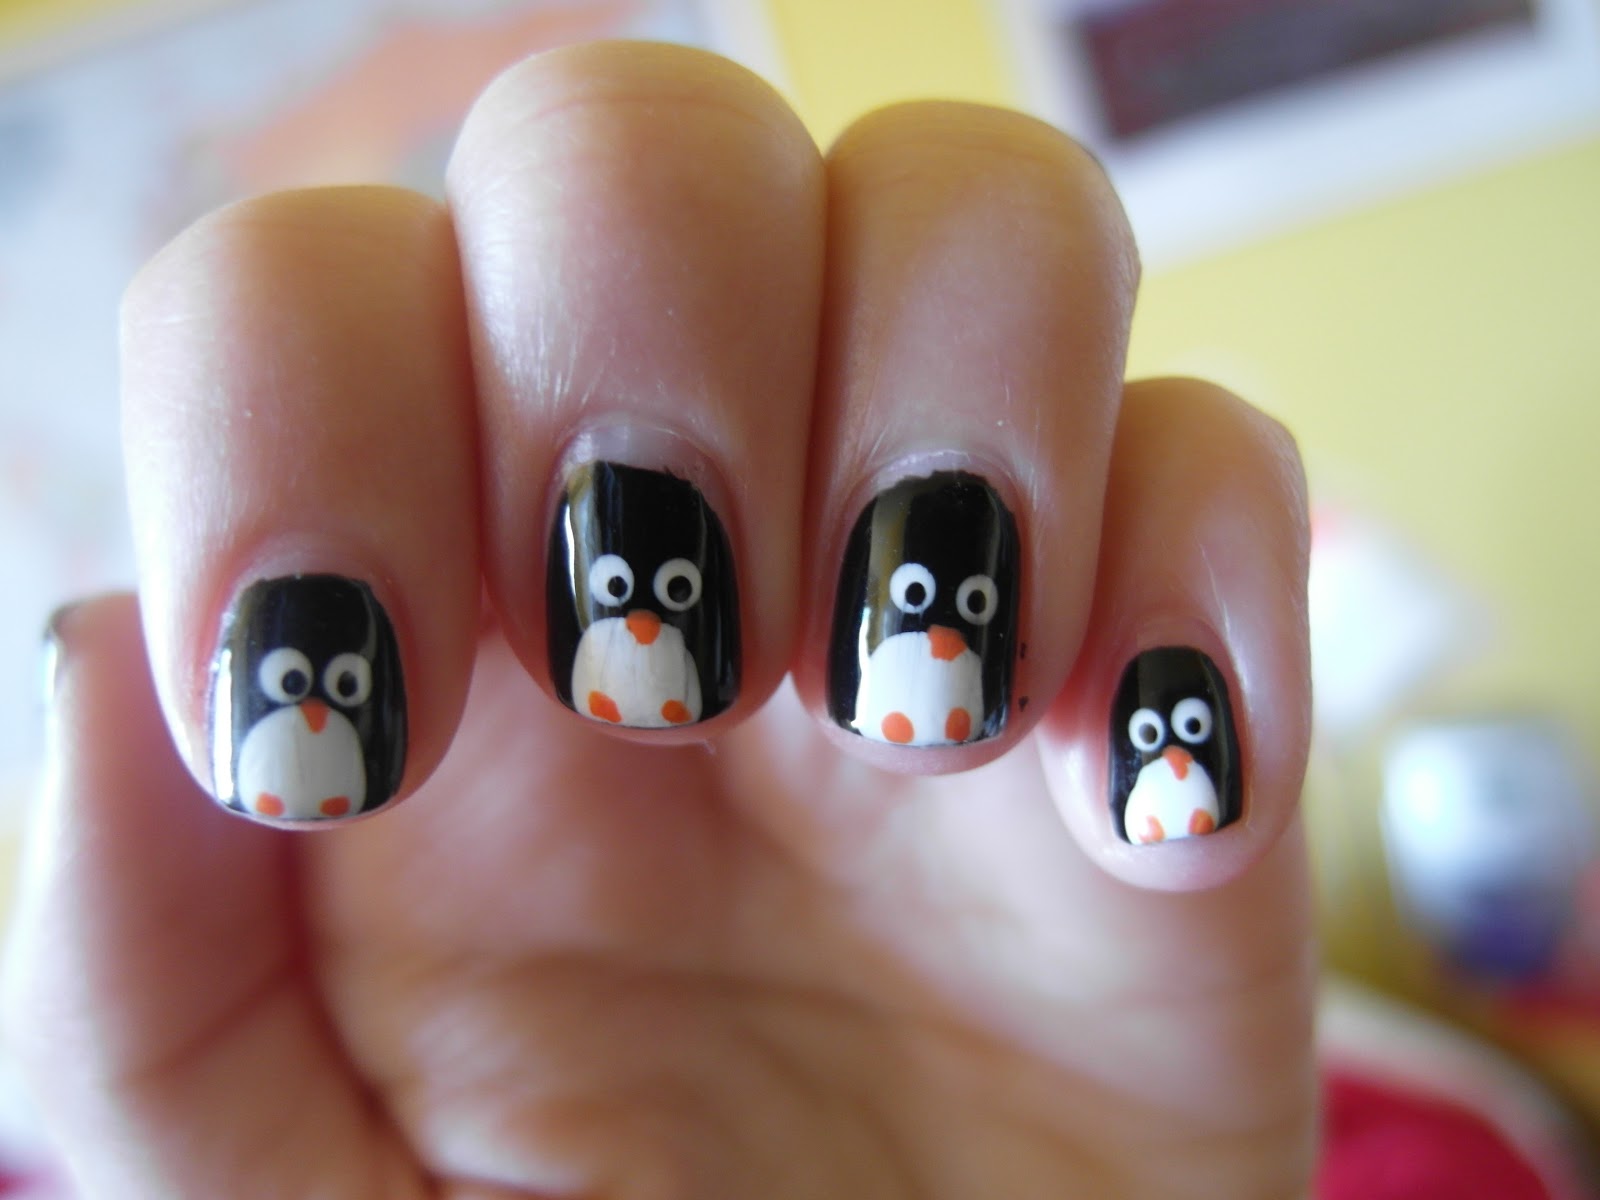 think they39;re just so freaking adorable. I love penguins.